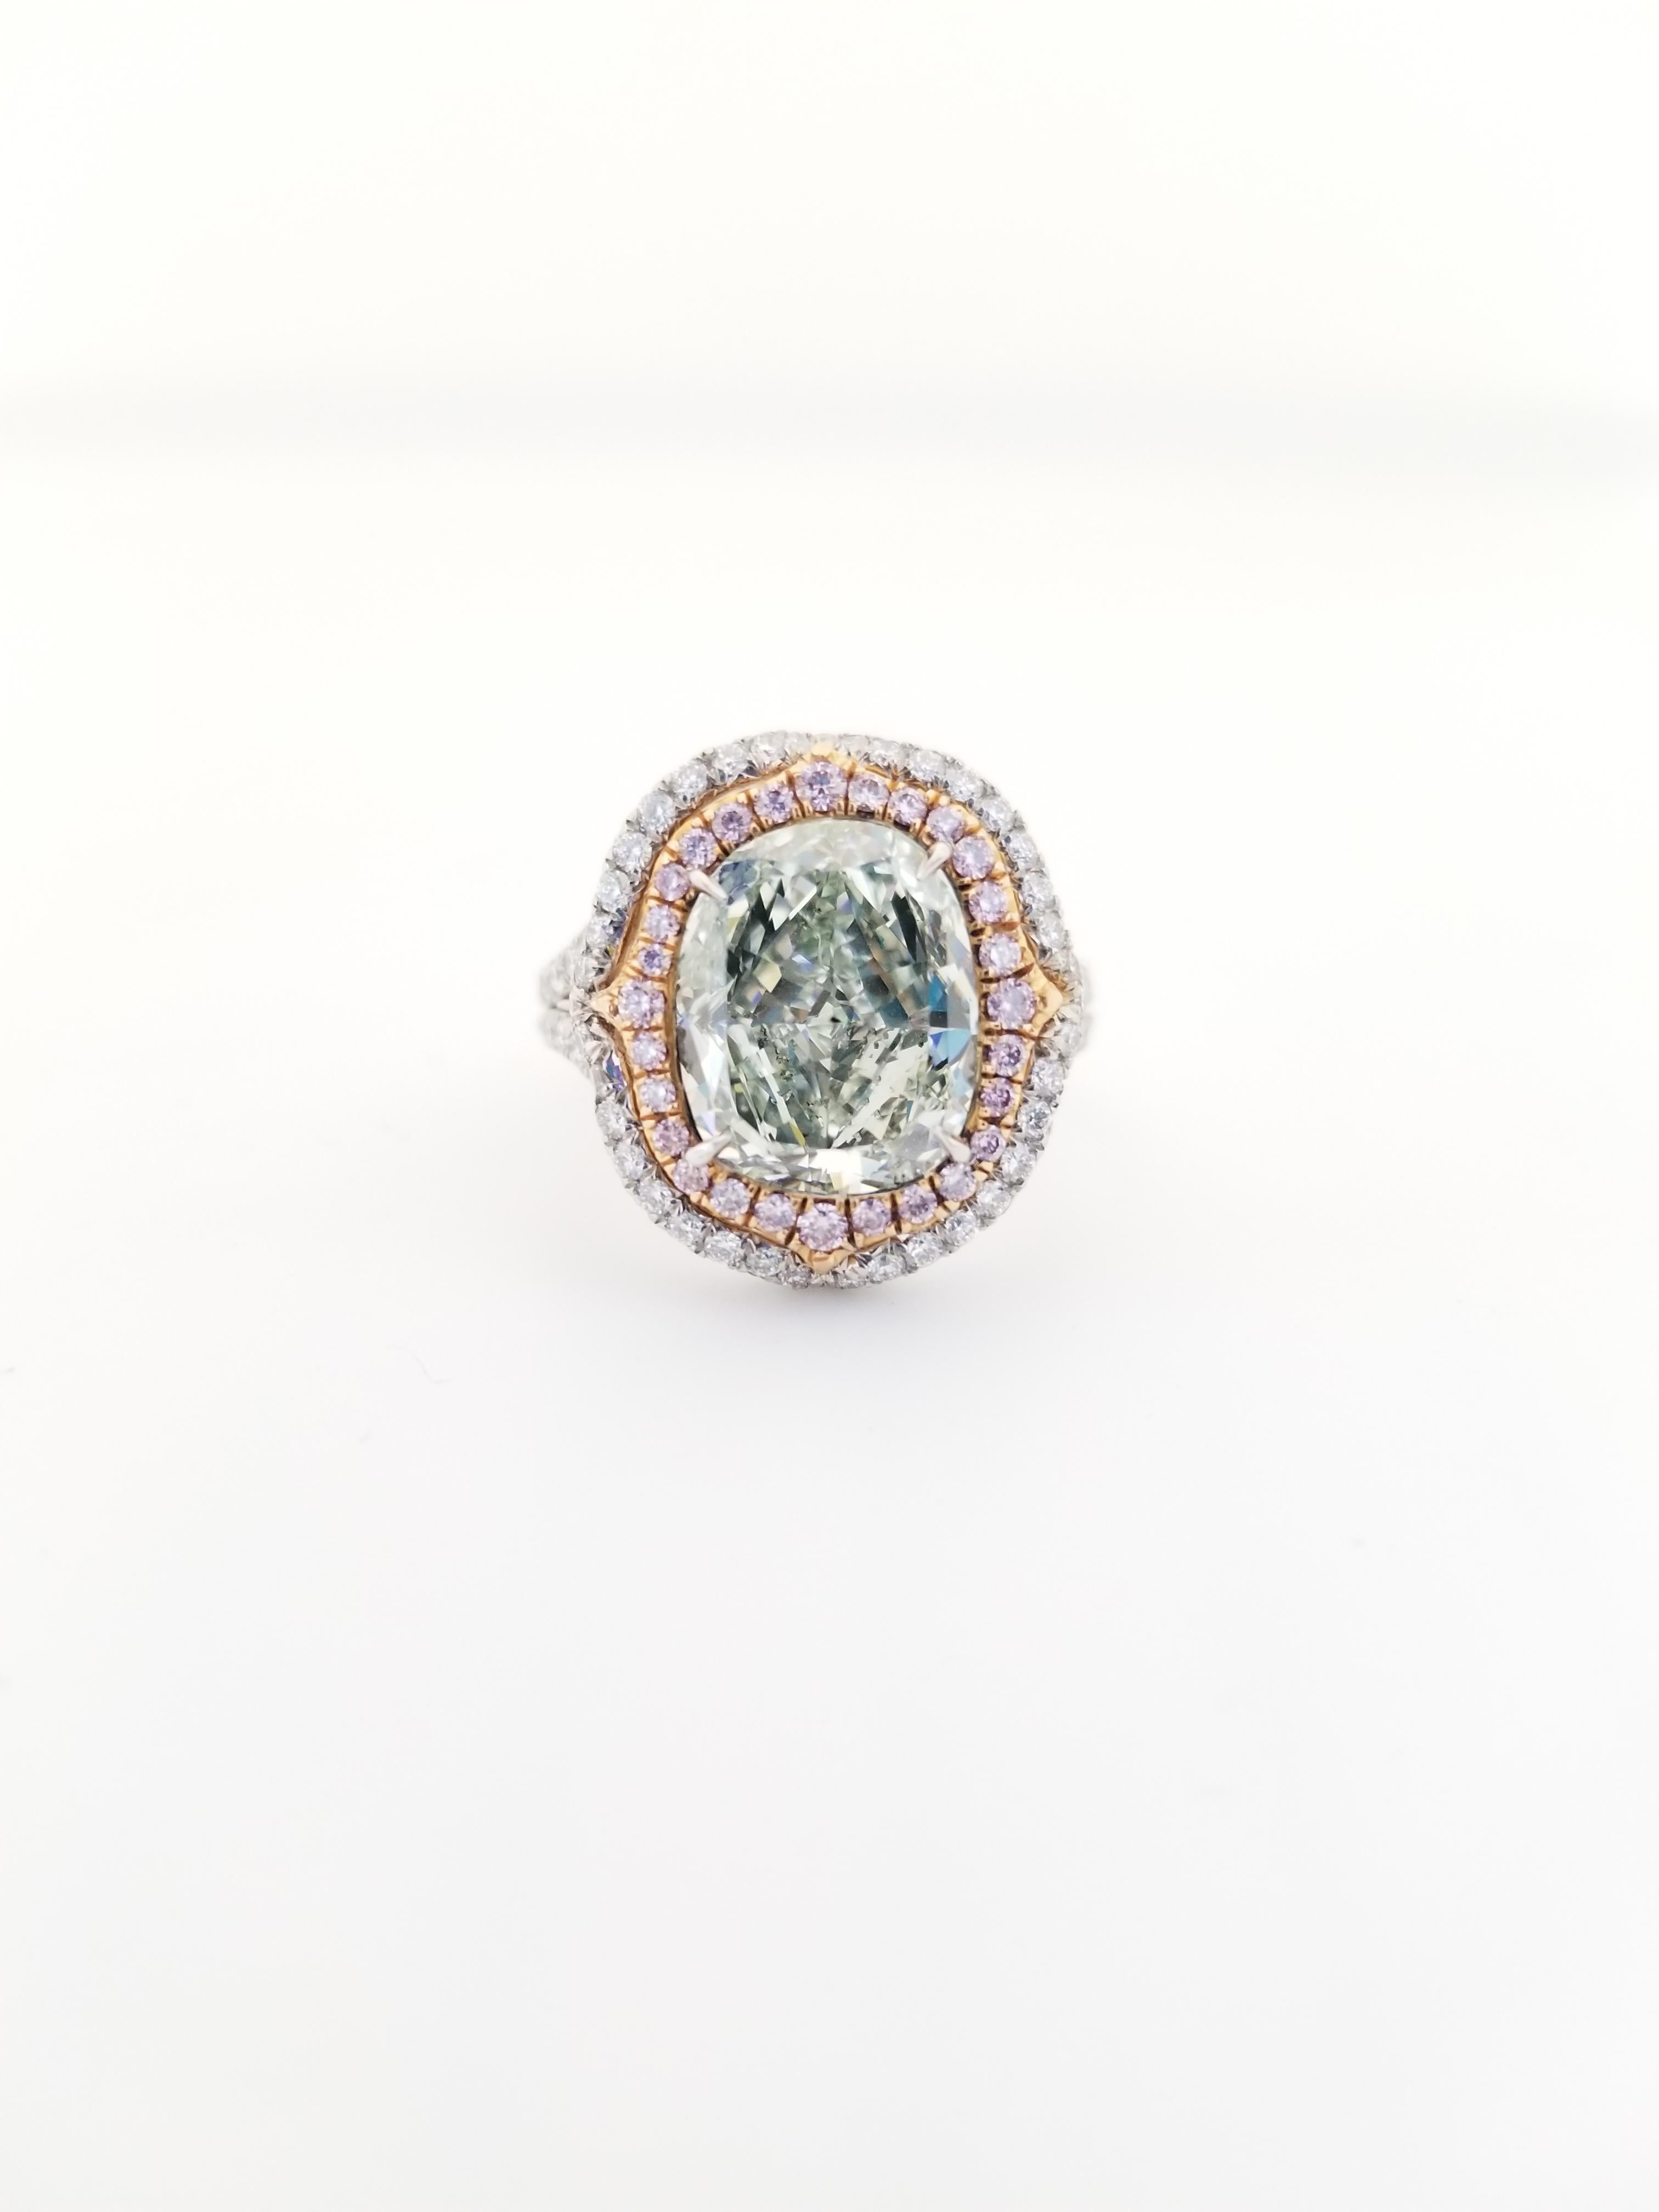 Beautiful natural fancy yellowish green cushion cut diamond weighing 4.51 carats. Certified by GIA. surrounded by round pink and white diamonds. set in 4 prong double halo setting. Its transparency and luster are excellent. 18K/Platinum white gold,